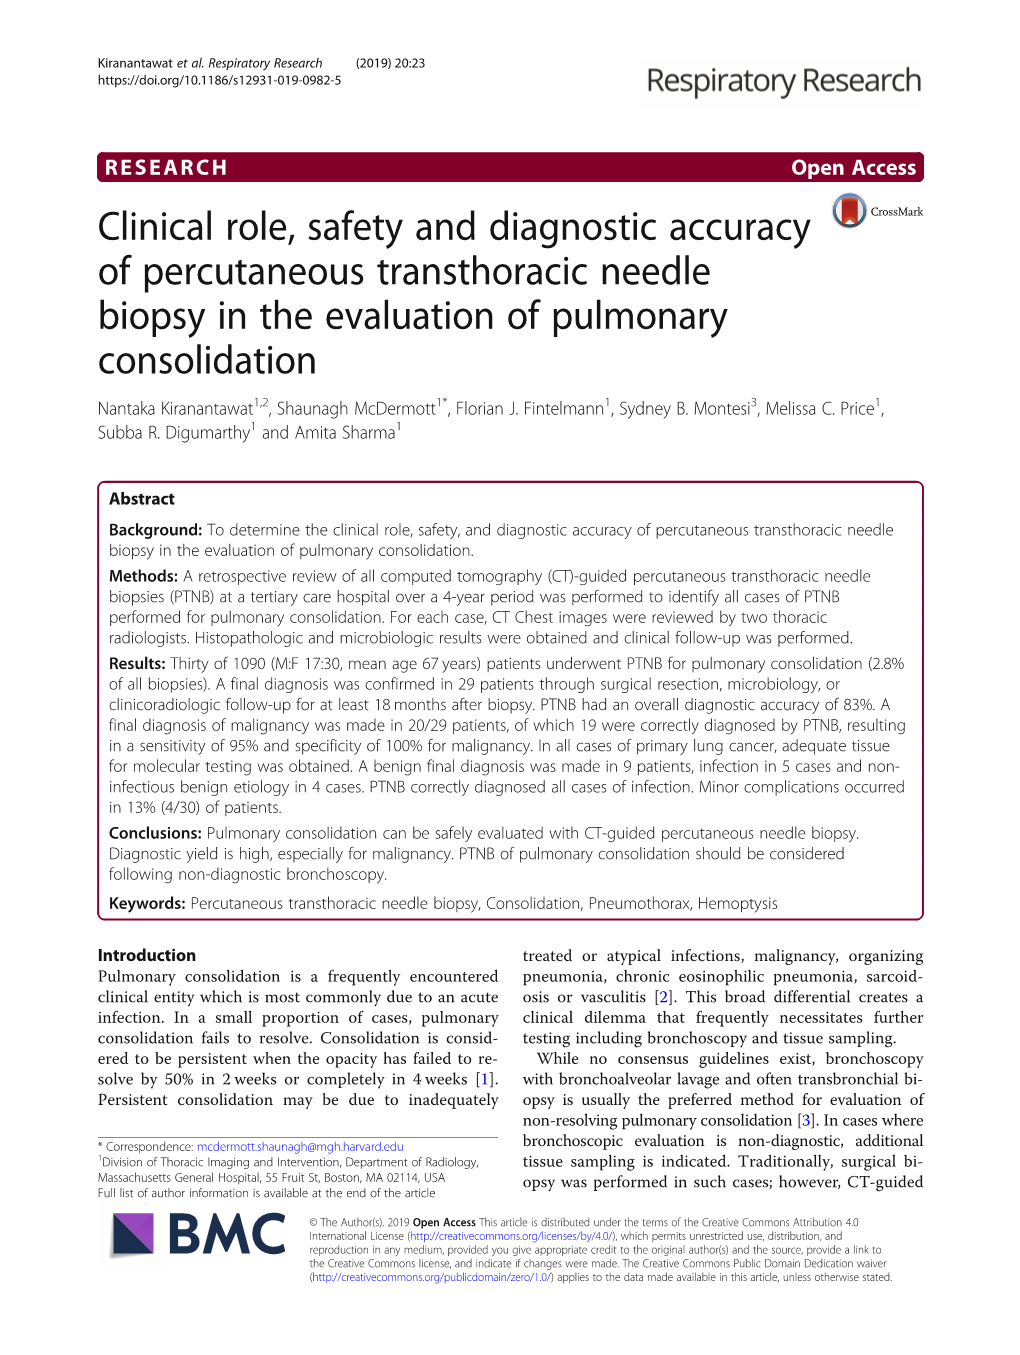 Clinical Role, Safety and Diagnostic Accuracy of Percutaneous